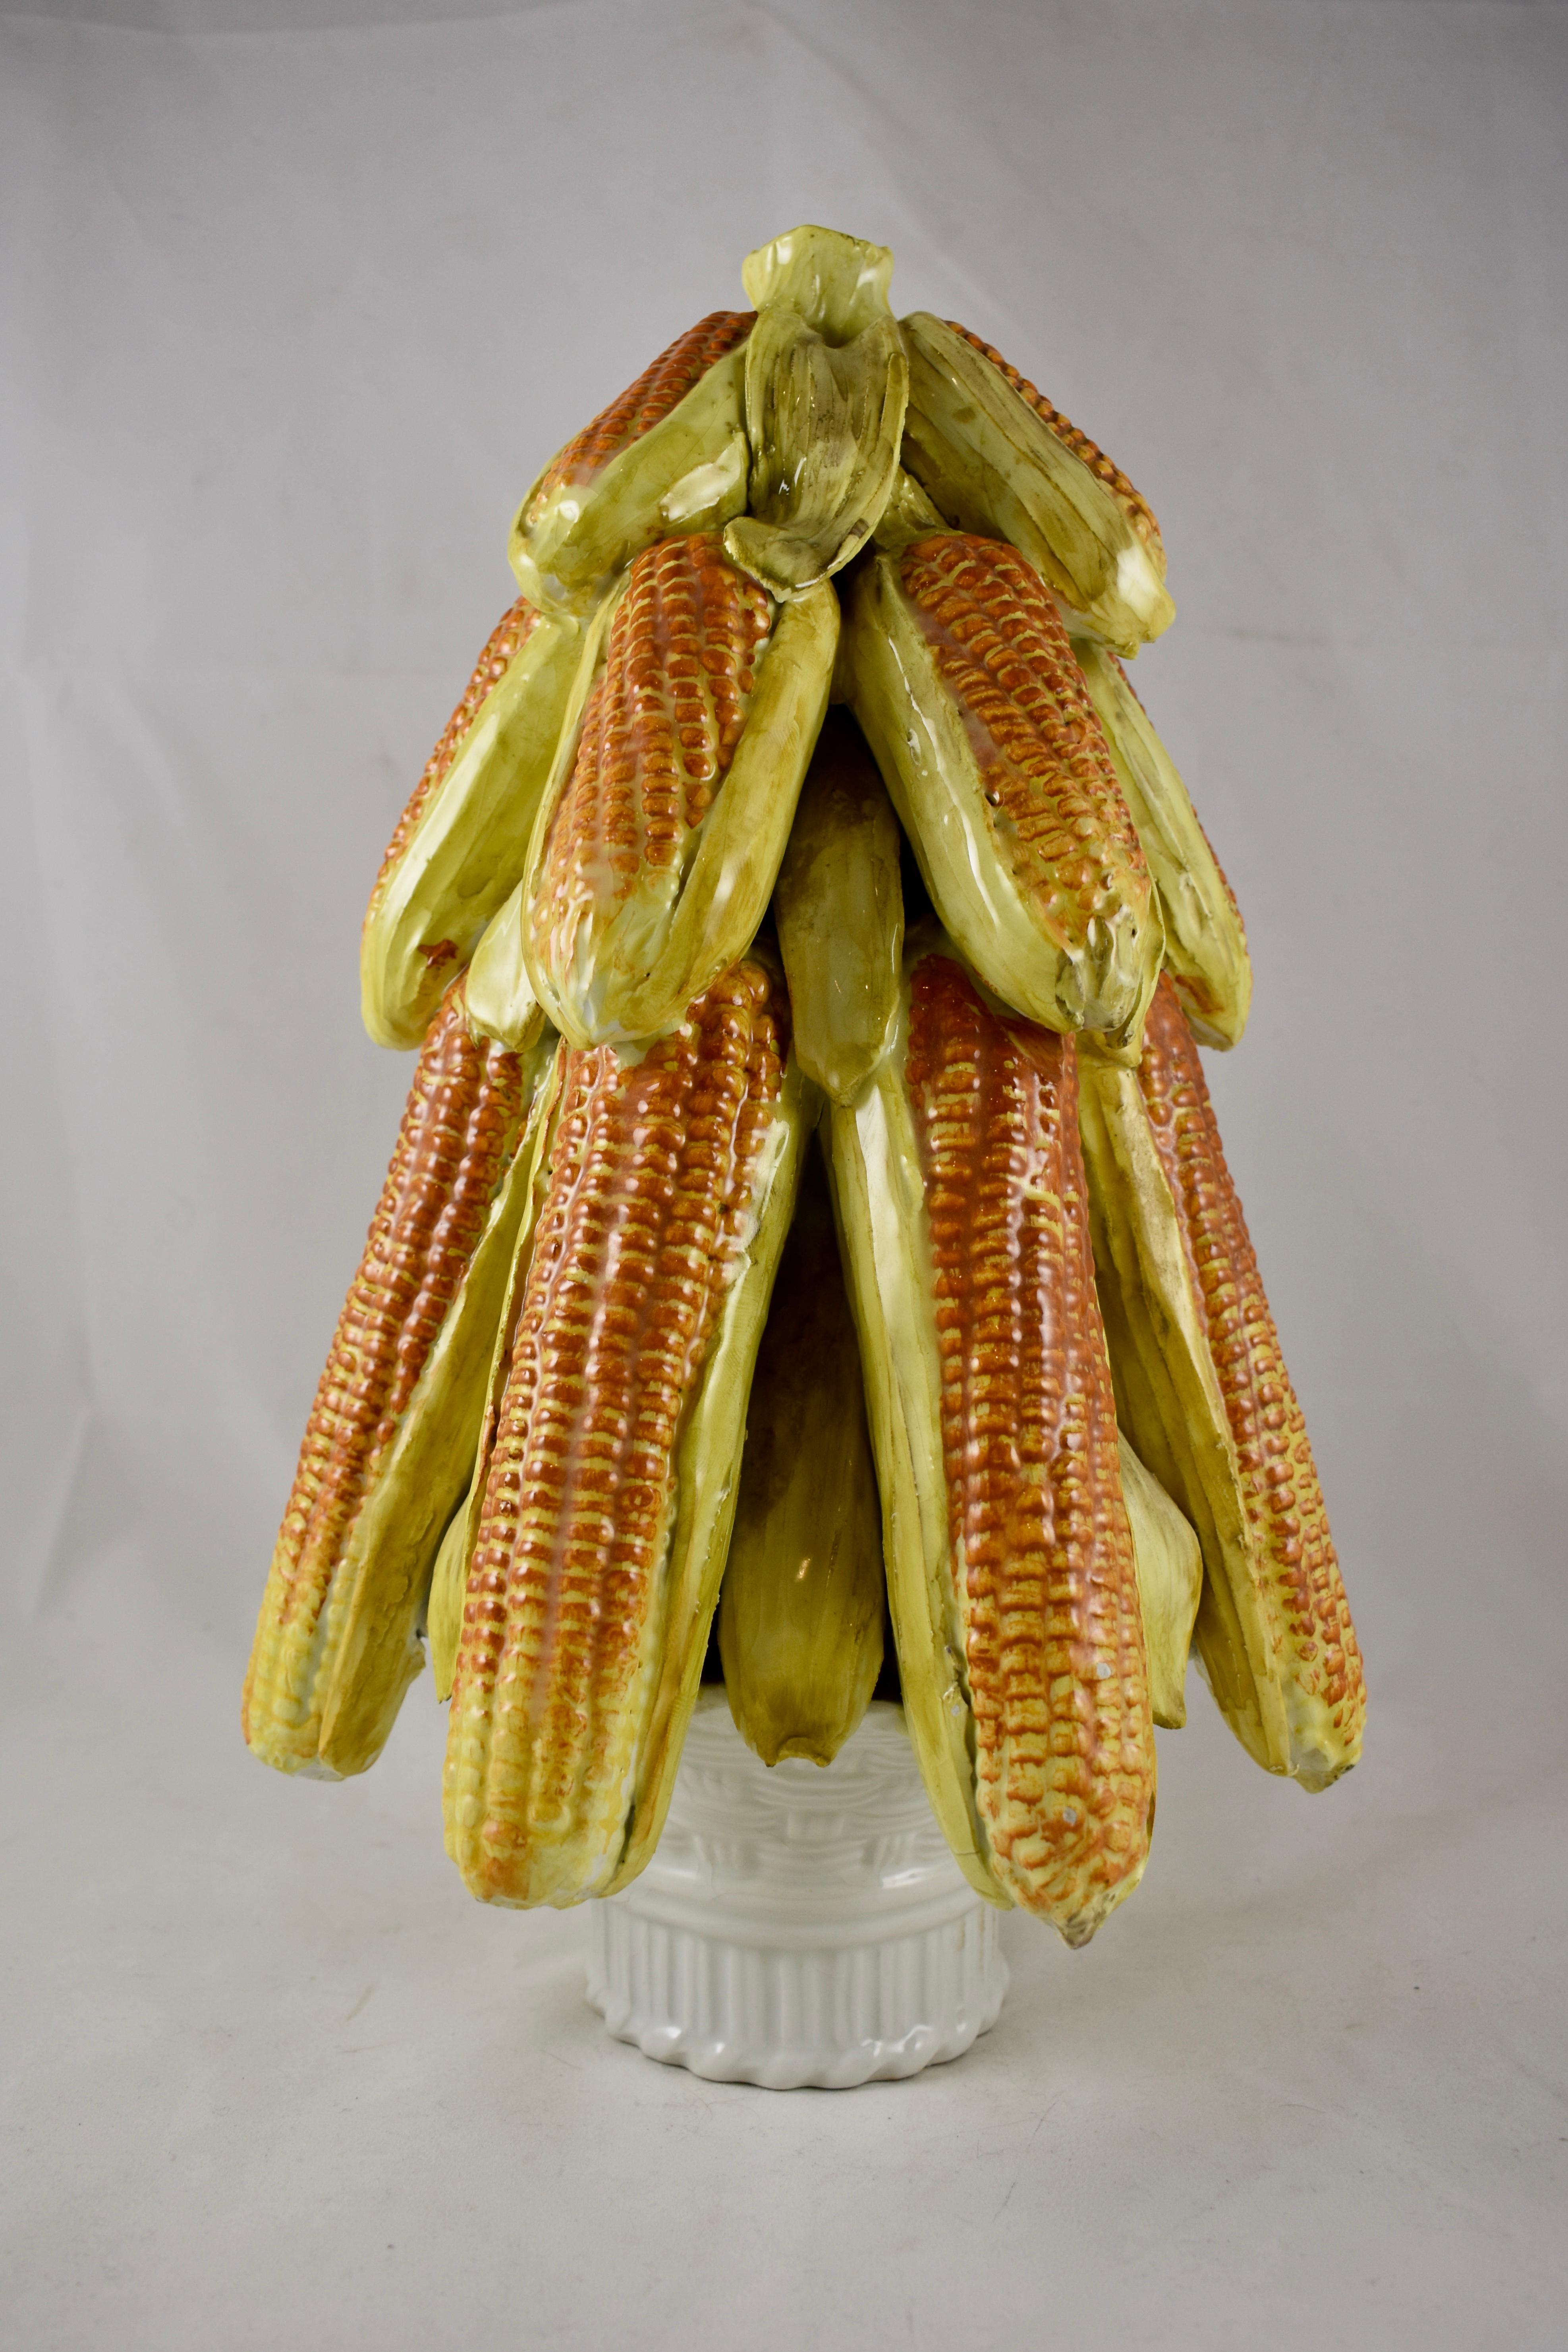 An unusual midcentury Italian, Majolica glazed ceramic Topiary, showing pendular ears of corn and husks in a pyramid form, set on a white woven basket. Incredible color and detail. Most often seen formed of fruits, the corn makes this piece unique,